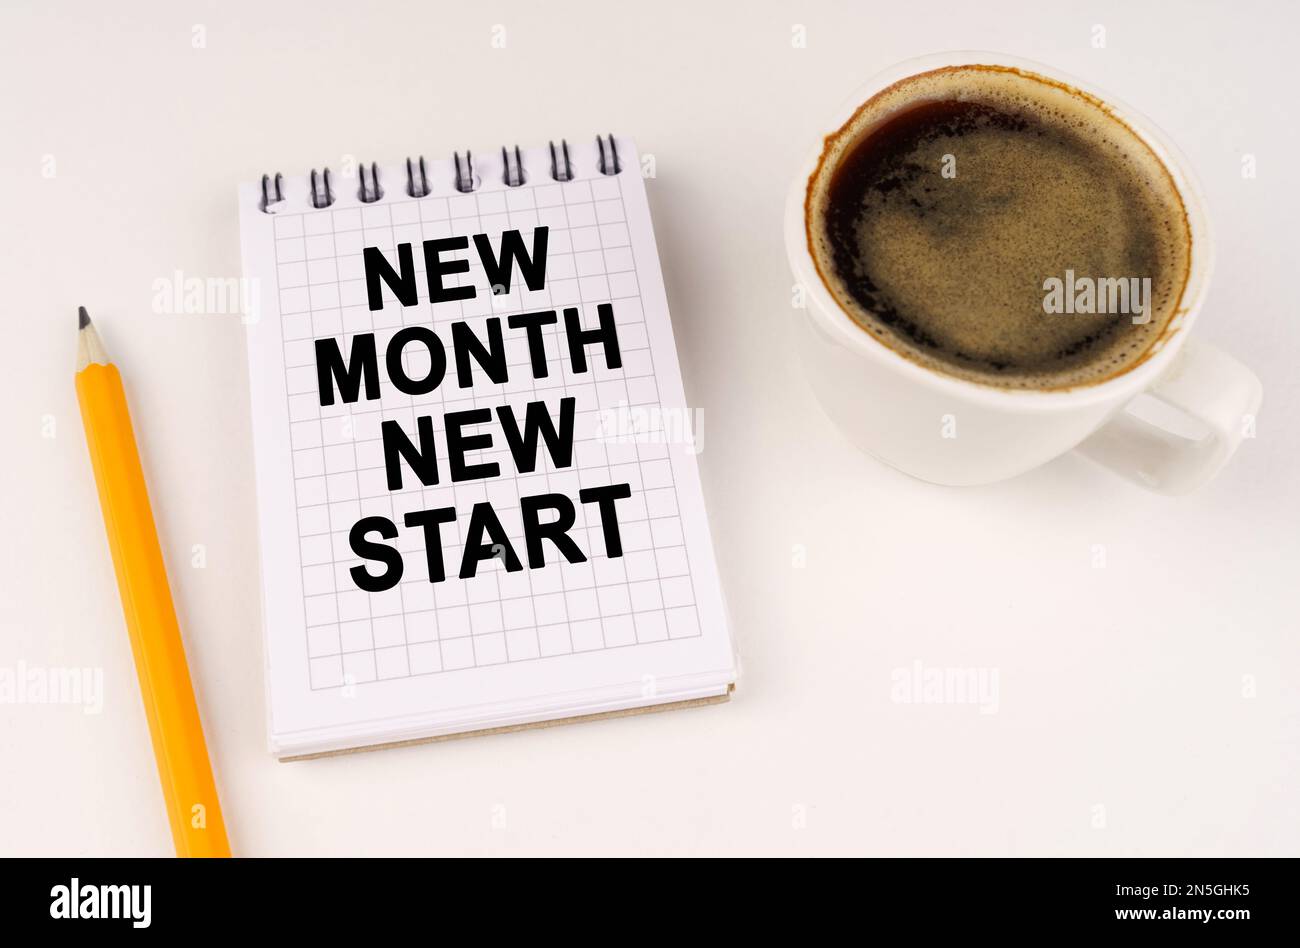 Business concept. On a white surface, a cup of coffee, a pencil and a notepad with the inscription - NEW MONTH NEW START Stock Photo